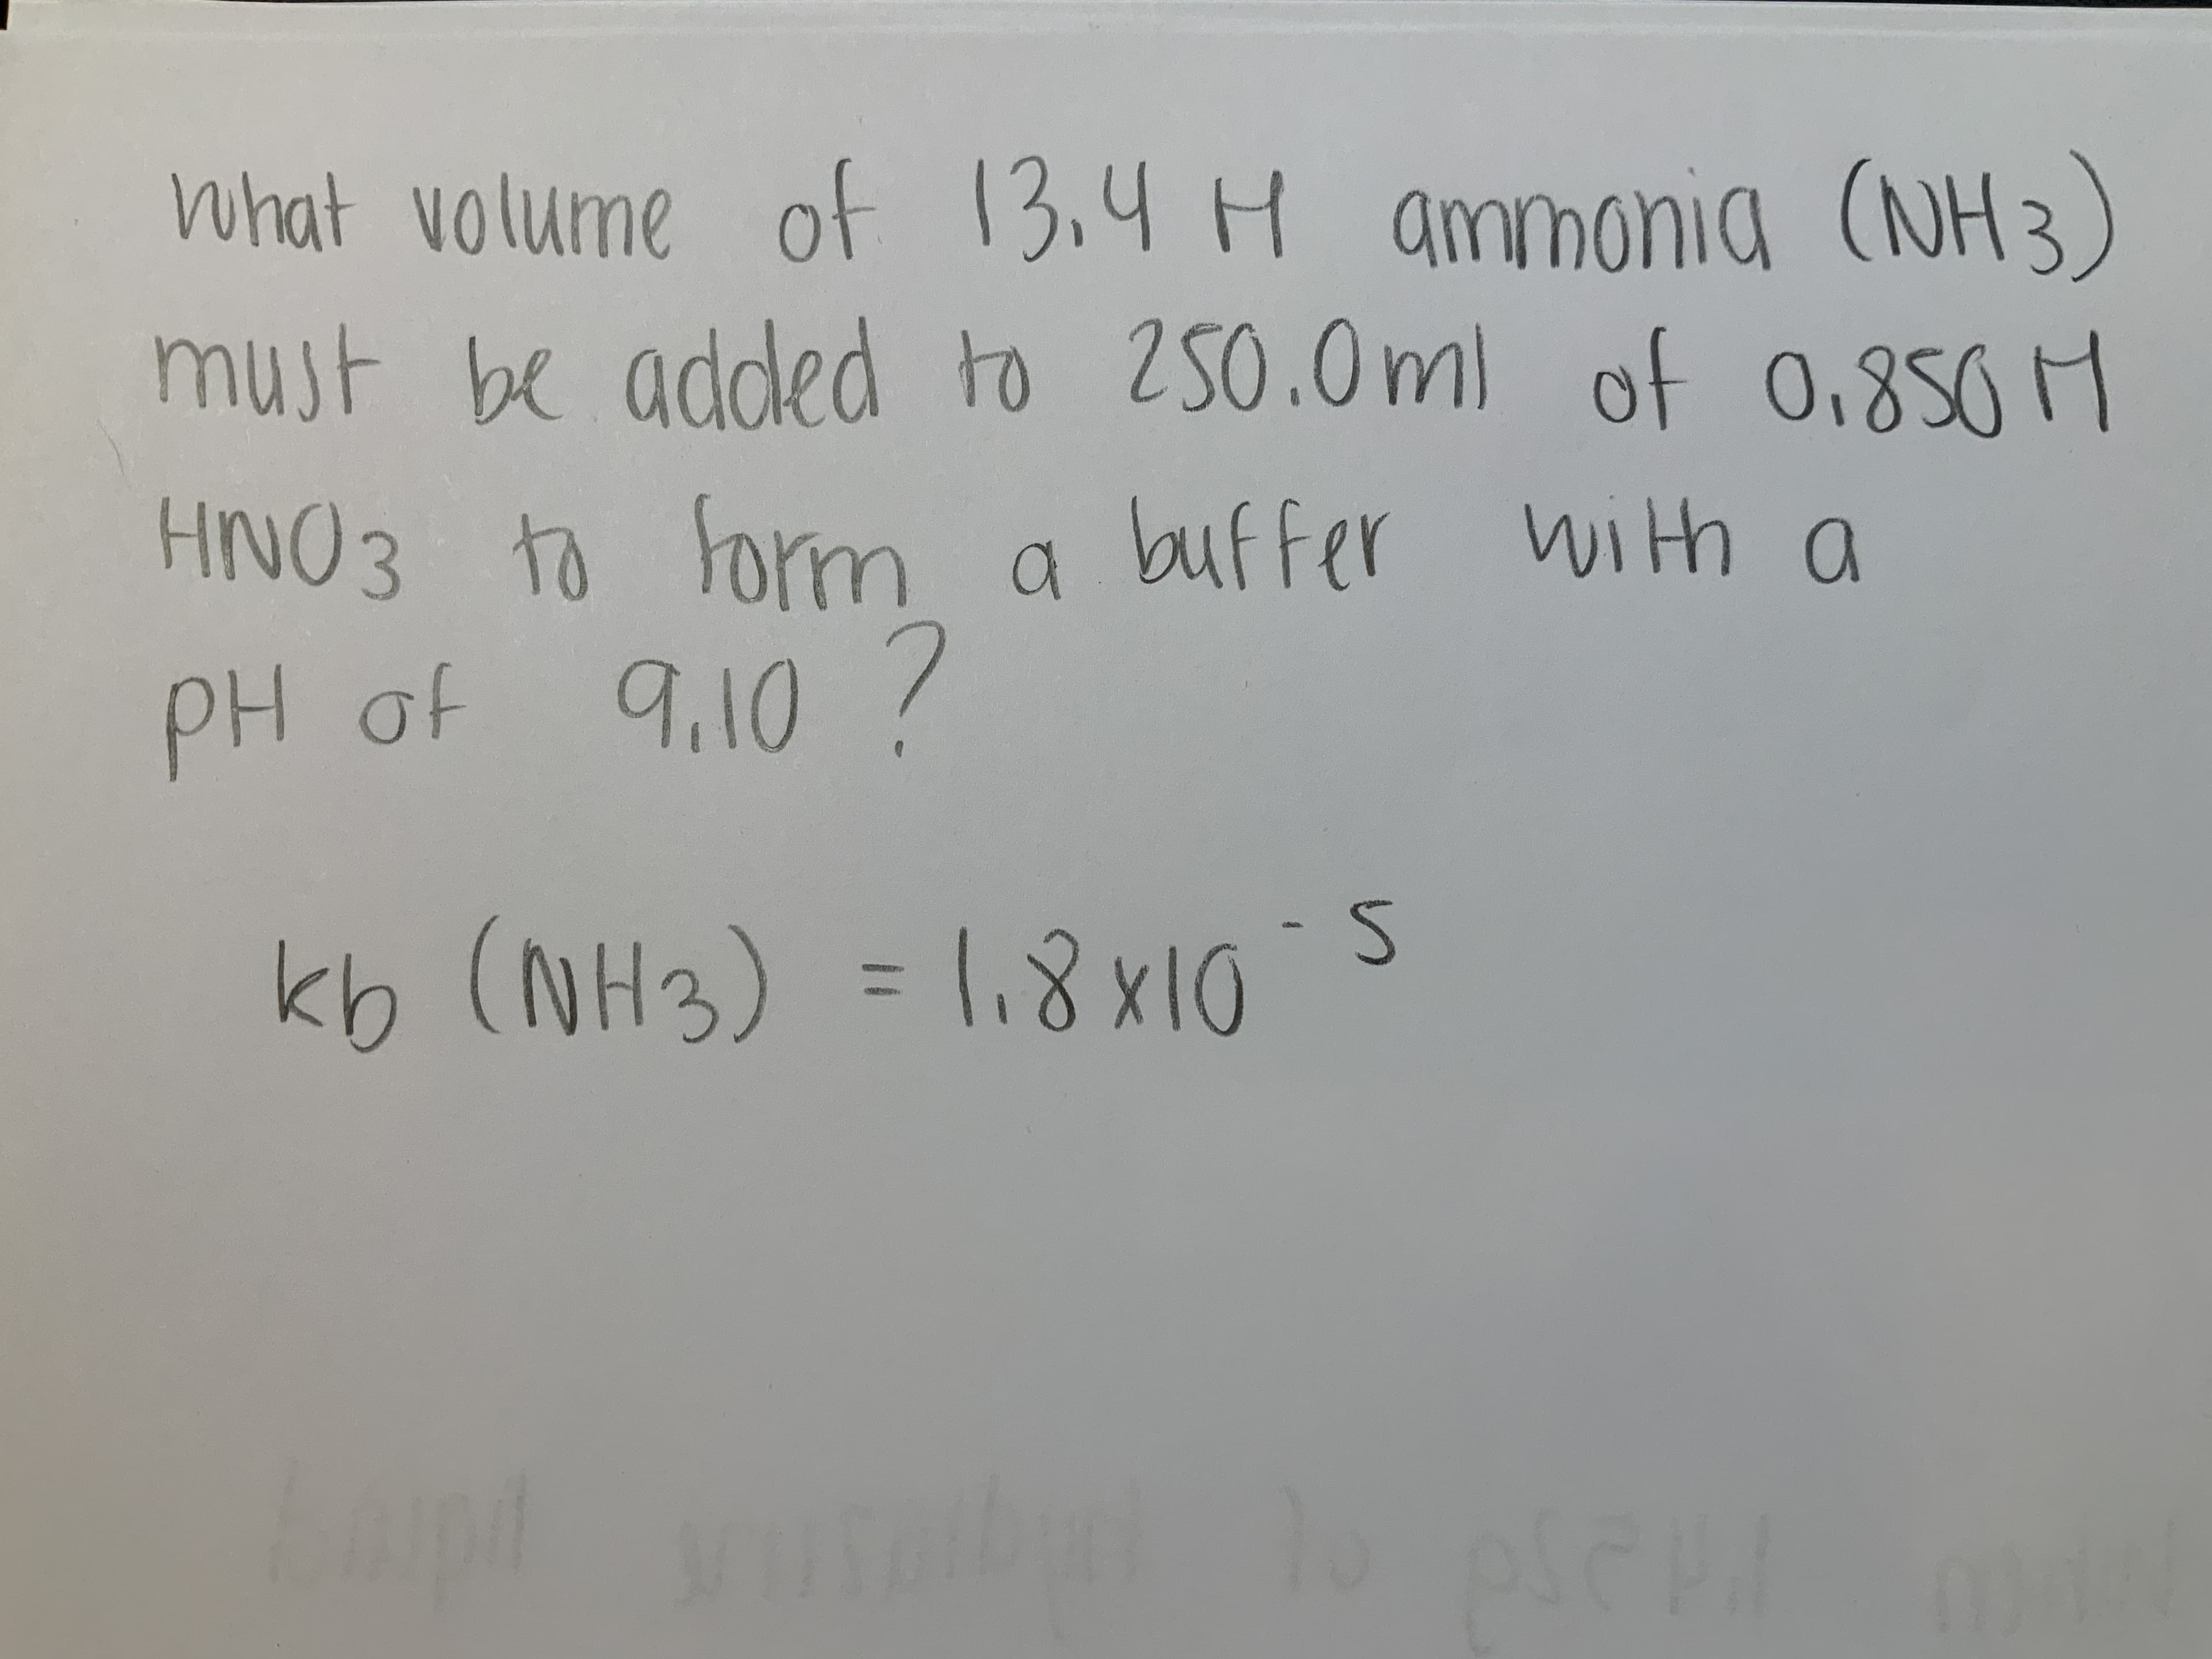 what volume of 13,4 H ammonia
(NH3)
must be added to 250.0m) of 0.850 M
HNO3 to form
a buffer wi th a
PH of
9.10 7
